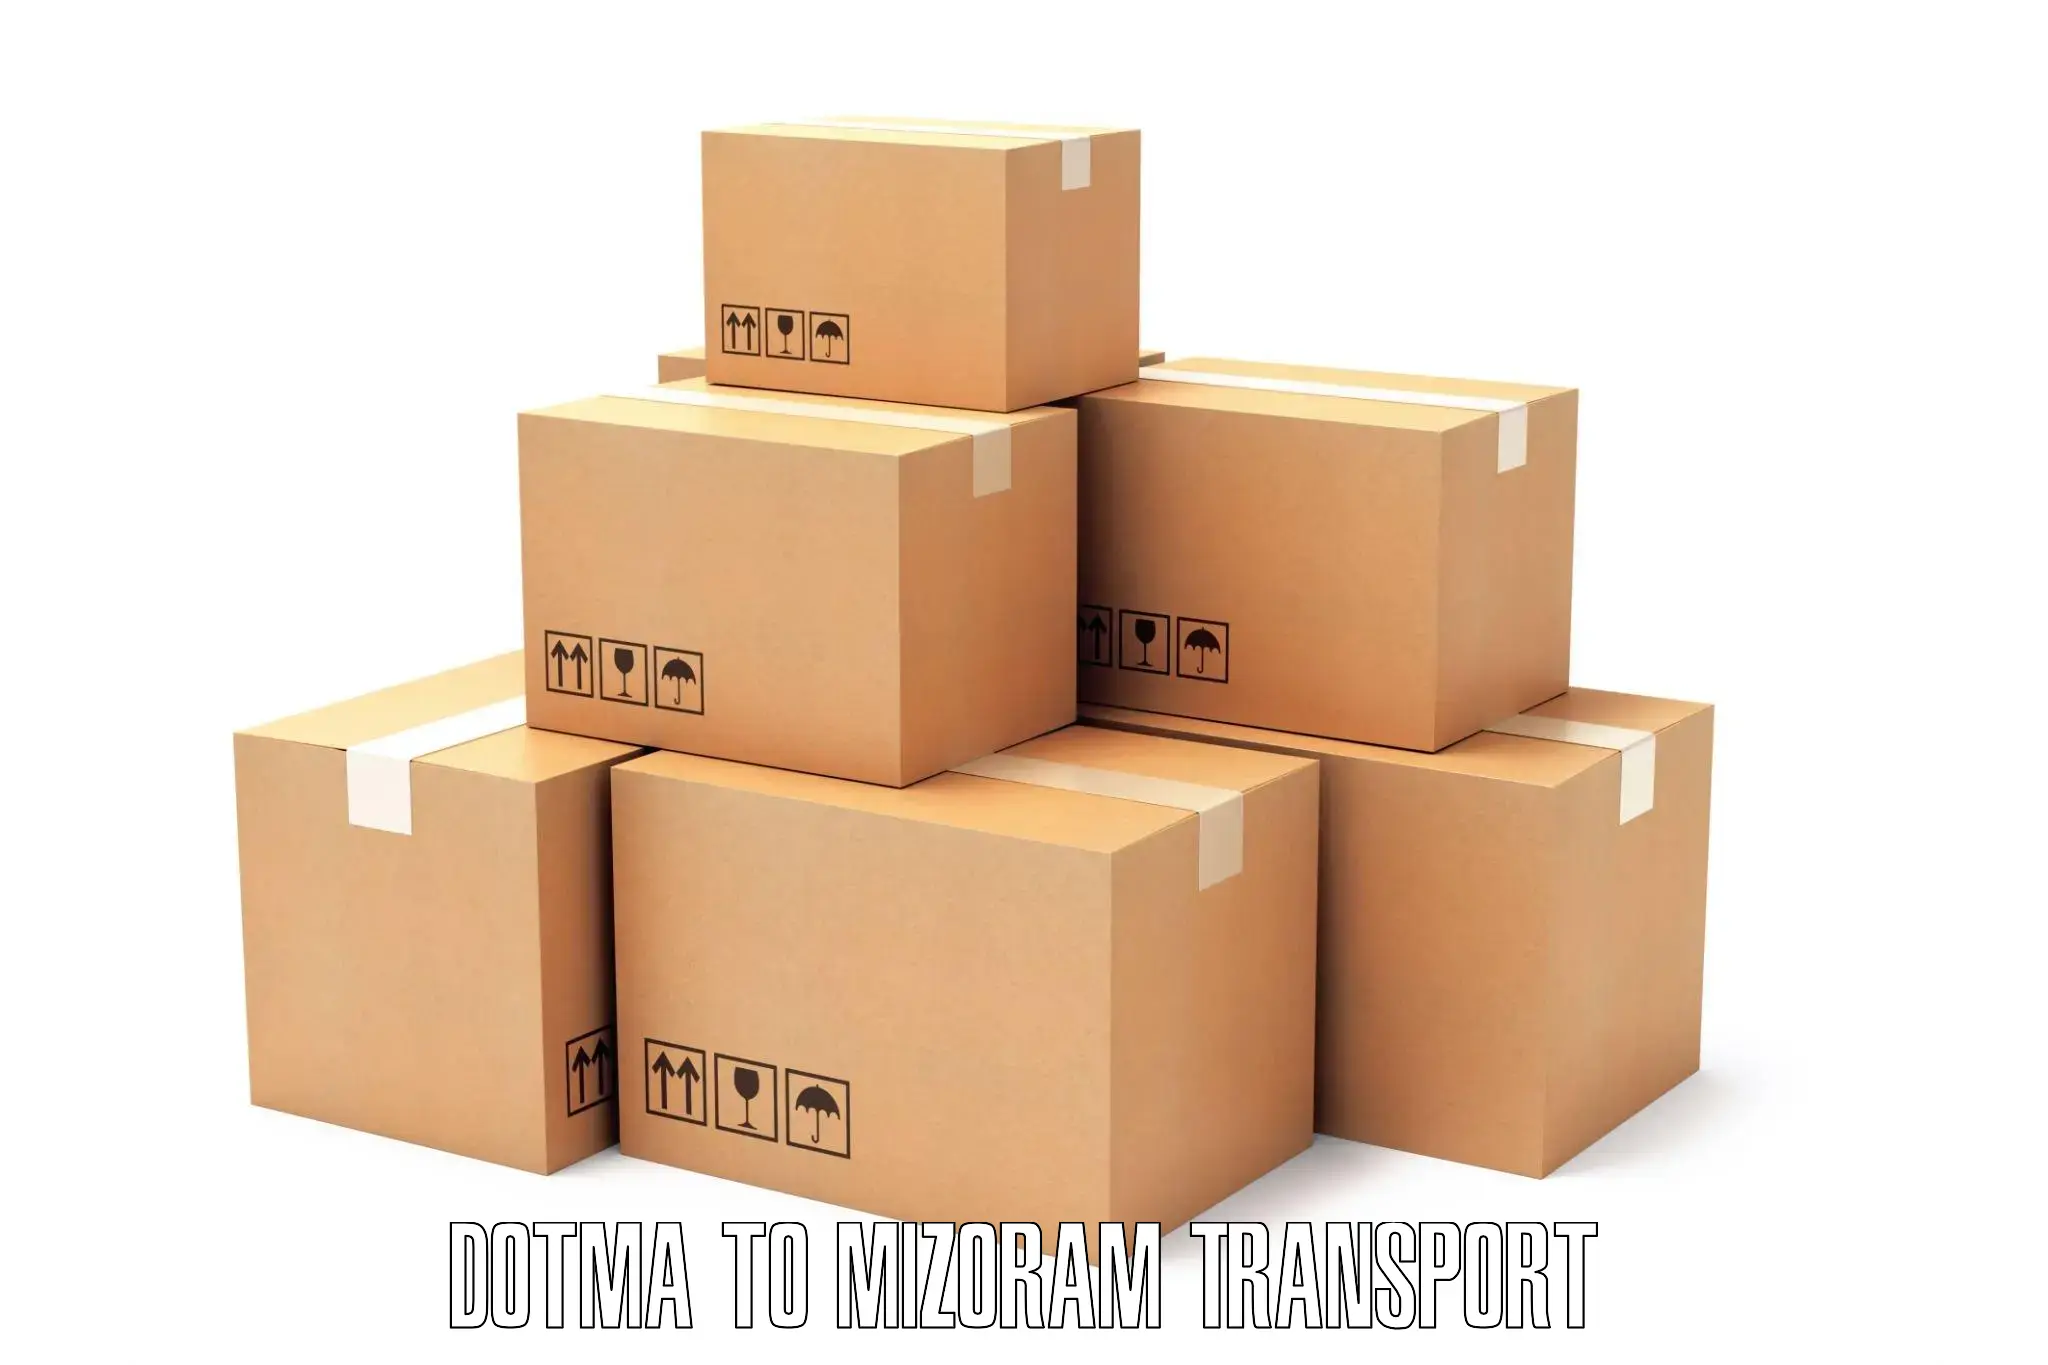 Container transport service Dotma to Darlawn